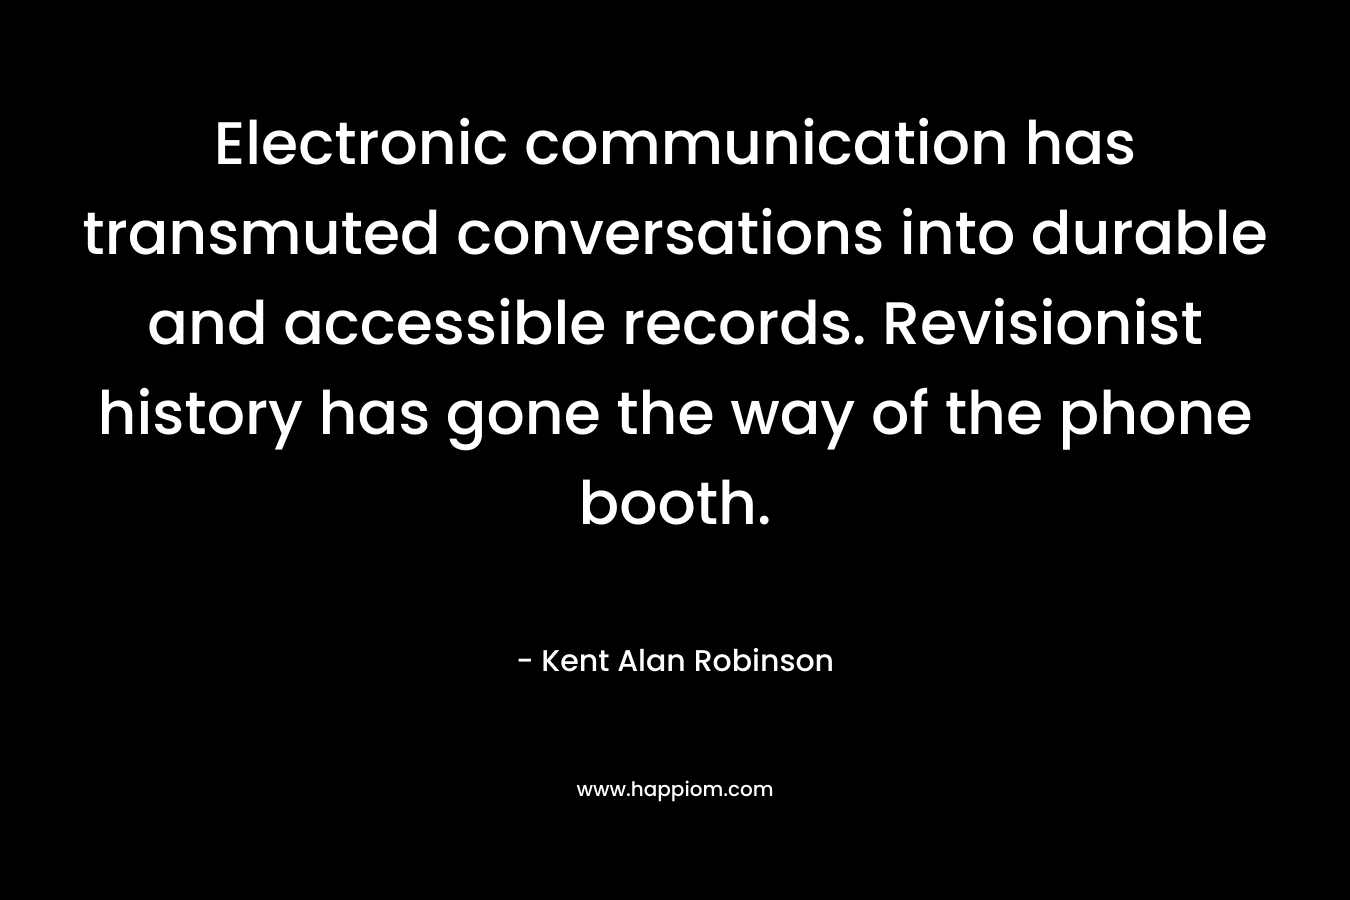 Electronic communication has transmuted conversations into durable and accessible records. Revisionist history has gone the way of the phone booth. – Kent Alan Robinson